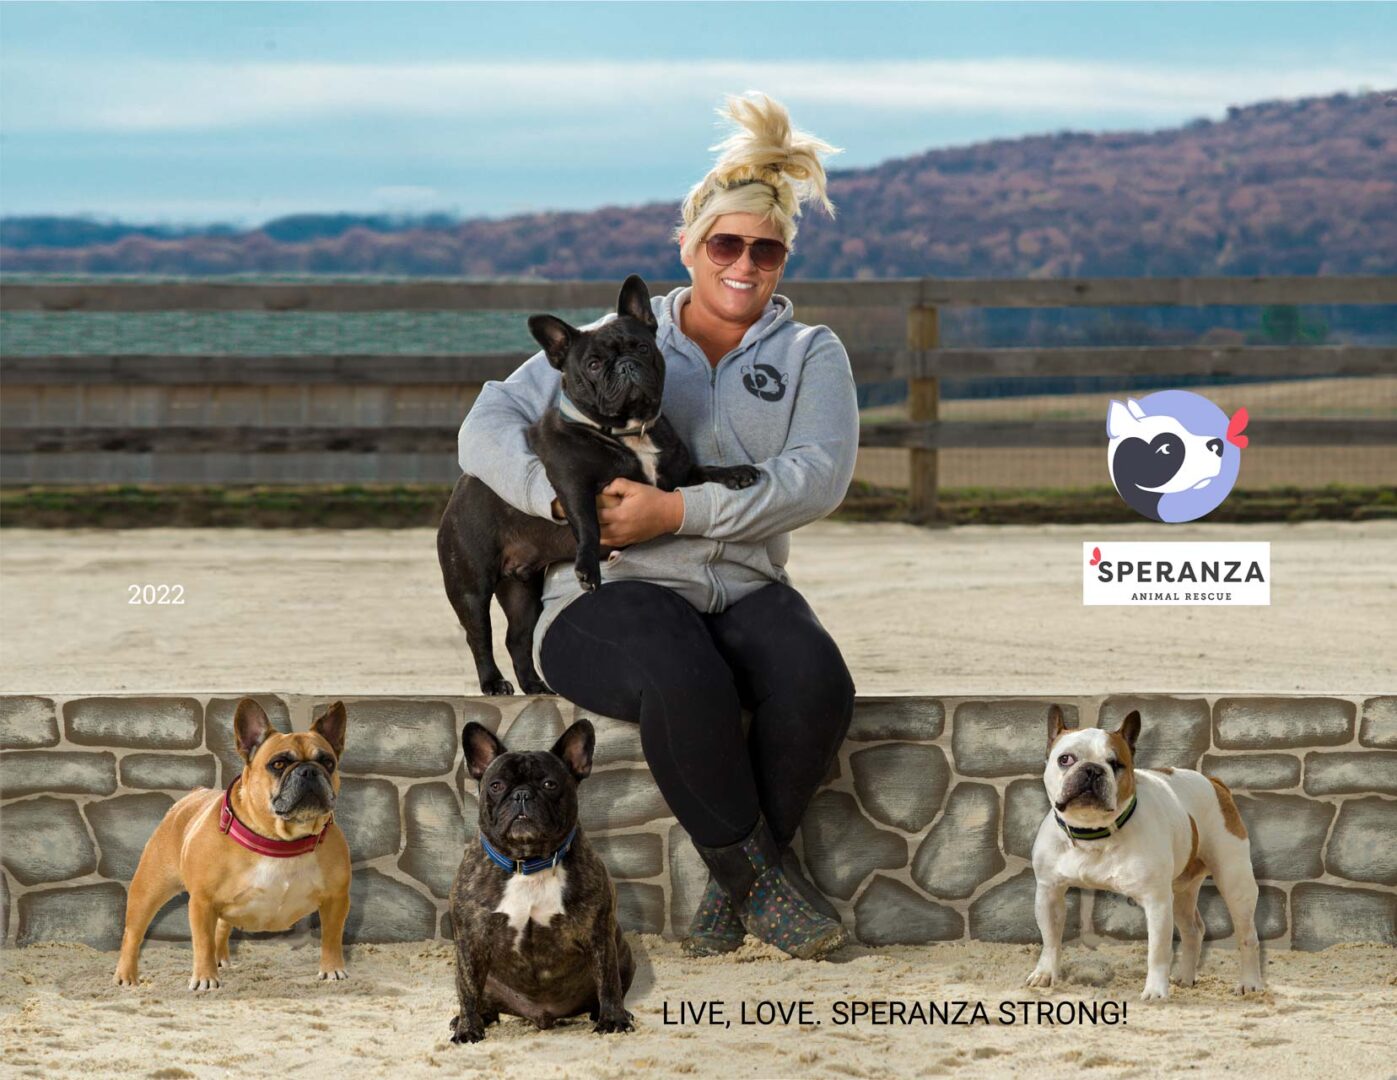 A woman holding two dogs in front of four other dogs.